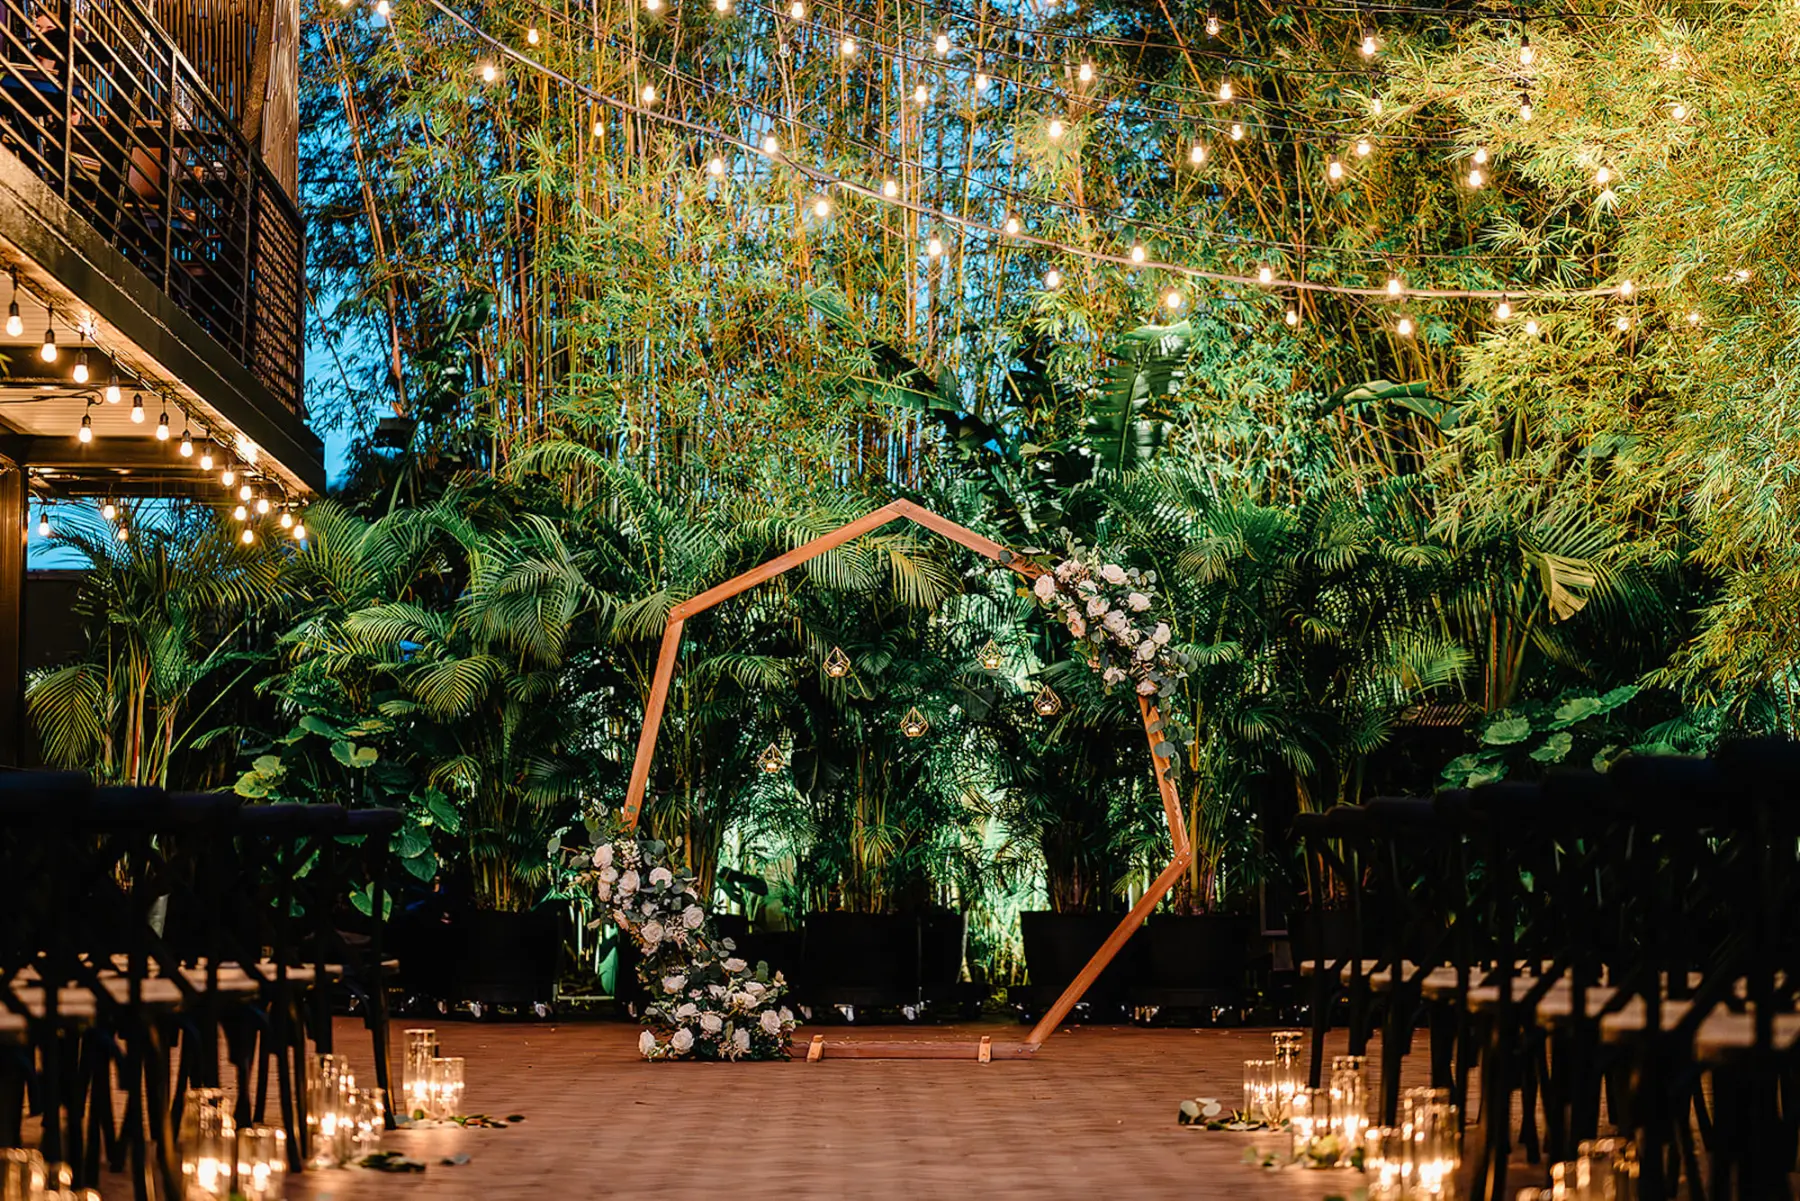 Great Gatsby Inspired Black and Gold Modern New Years Eve Bamboo Garden Wedding Ceremony Decor Ideas | Rustic Wooden Heptagon Arch Inspiration | St Pete Event Venue Nova 535